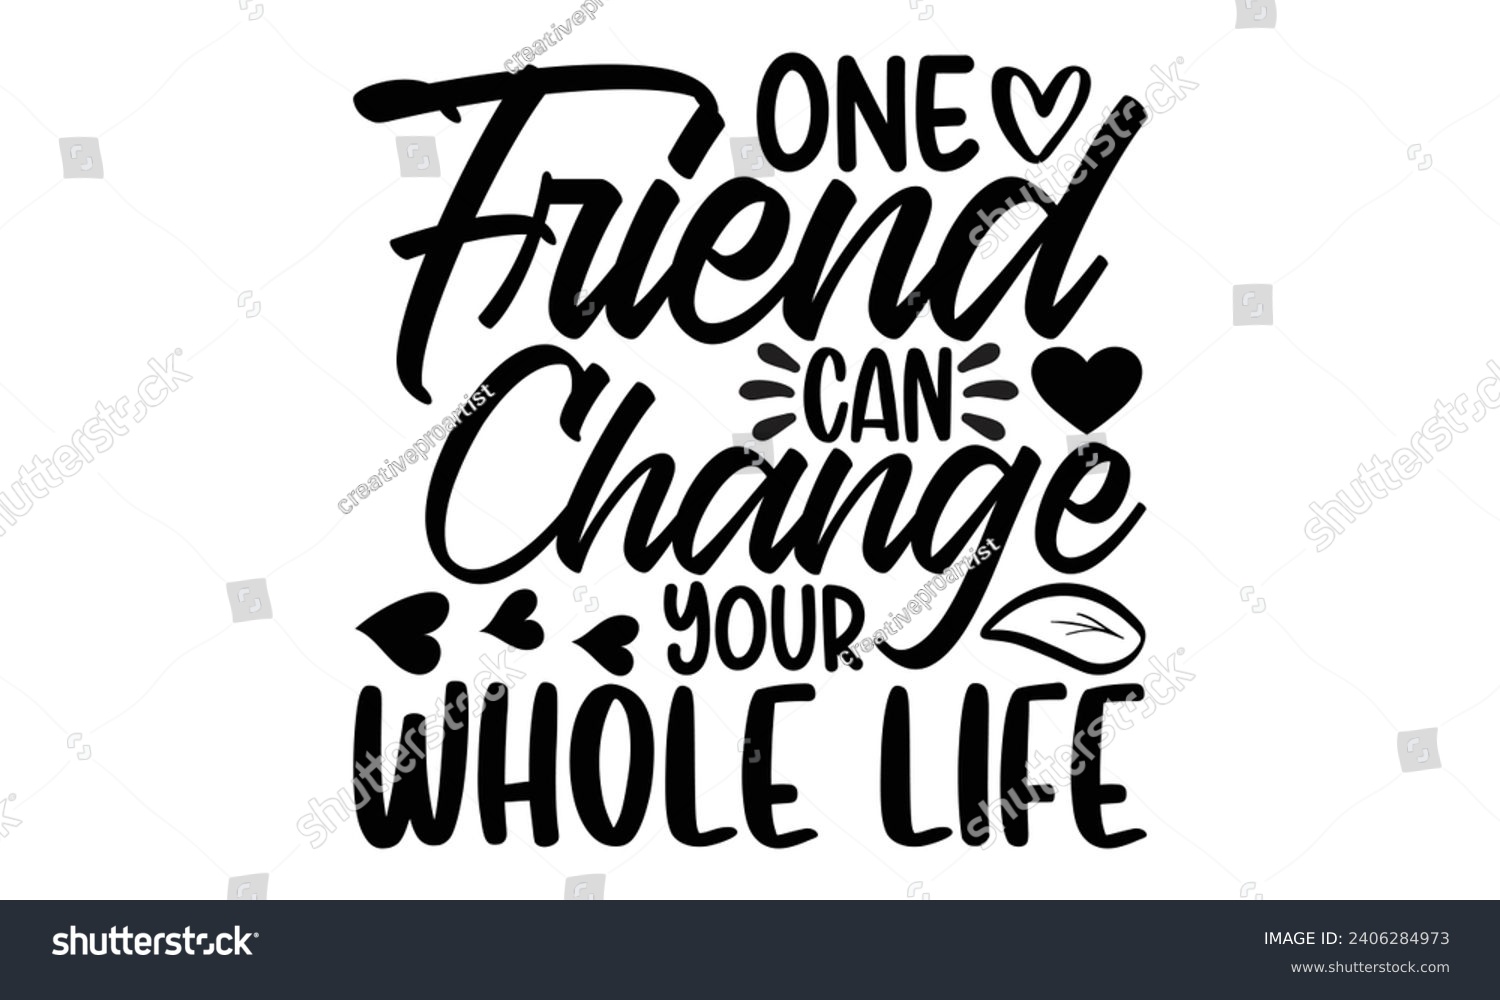 SVG of One Friend Can Change Your Whole Life- Best friends t- shirt design, Hand drawn lettering phrase, Illustration for prints on bags, posters, cards eps, Files for Cutting, Isolated on white background. svg